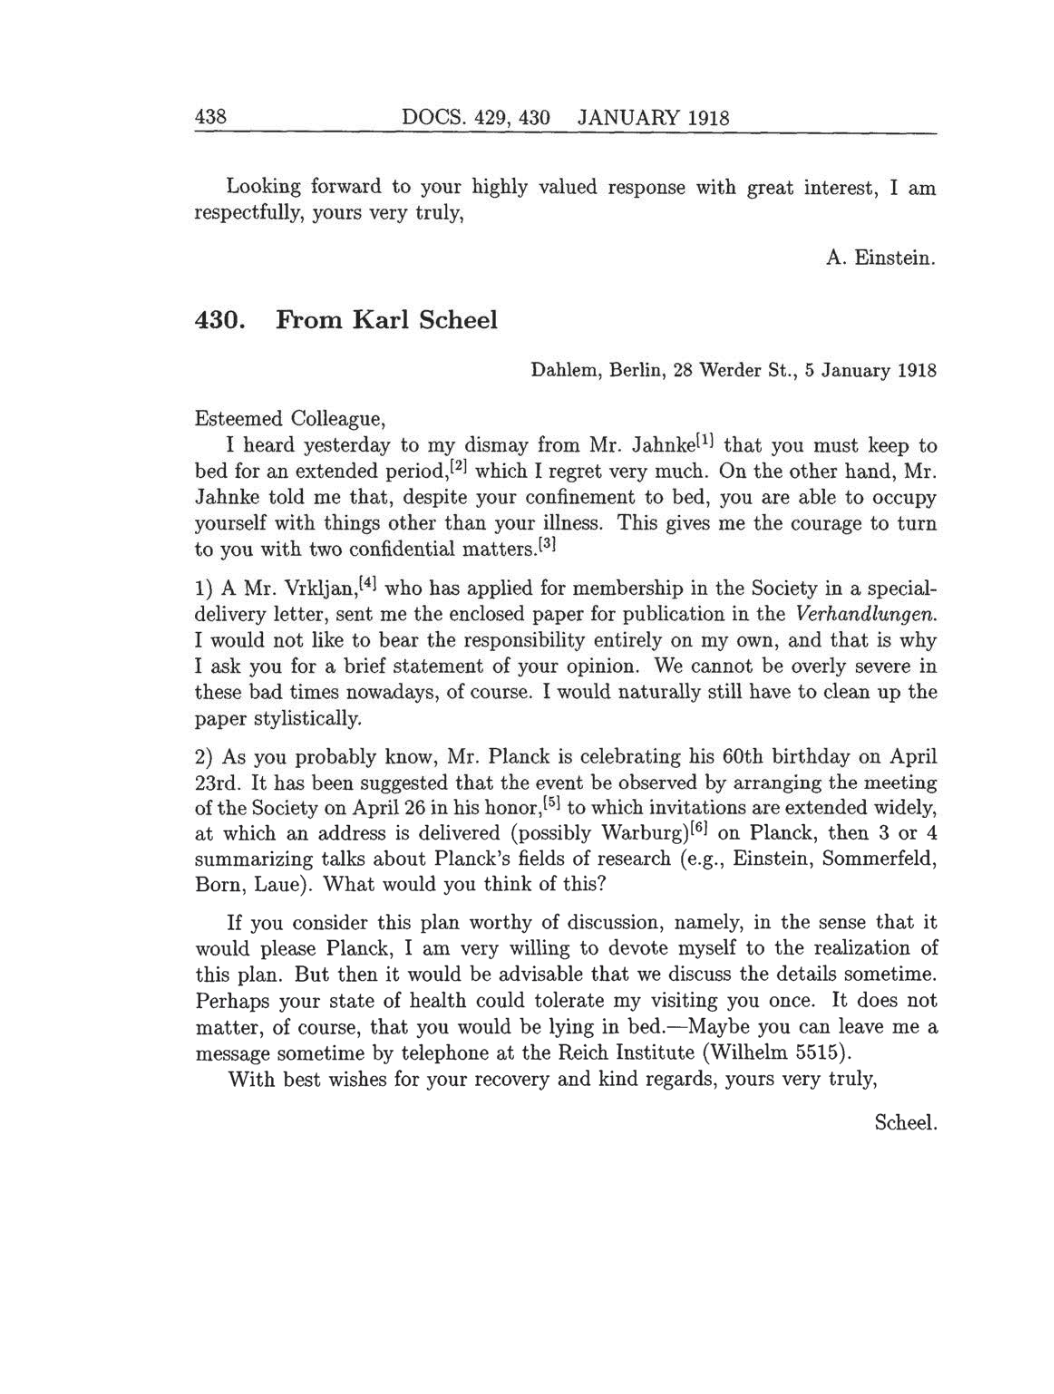 Volume 8: The Berlin Years: Correspondence, 1914-1918 (English translation supplement) page 438